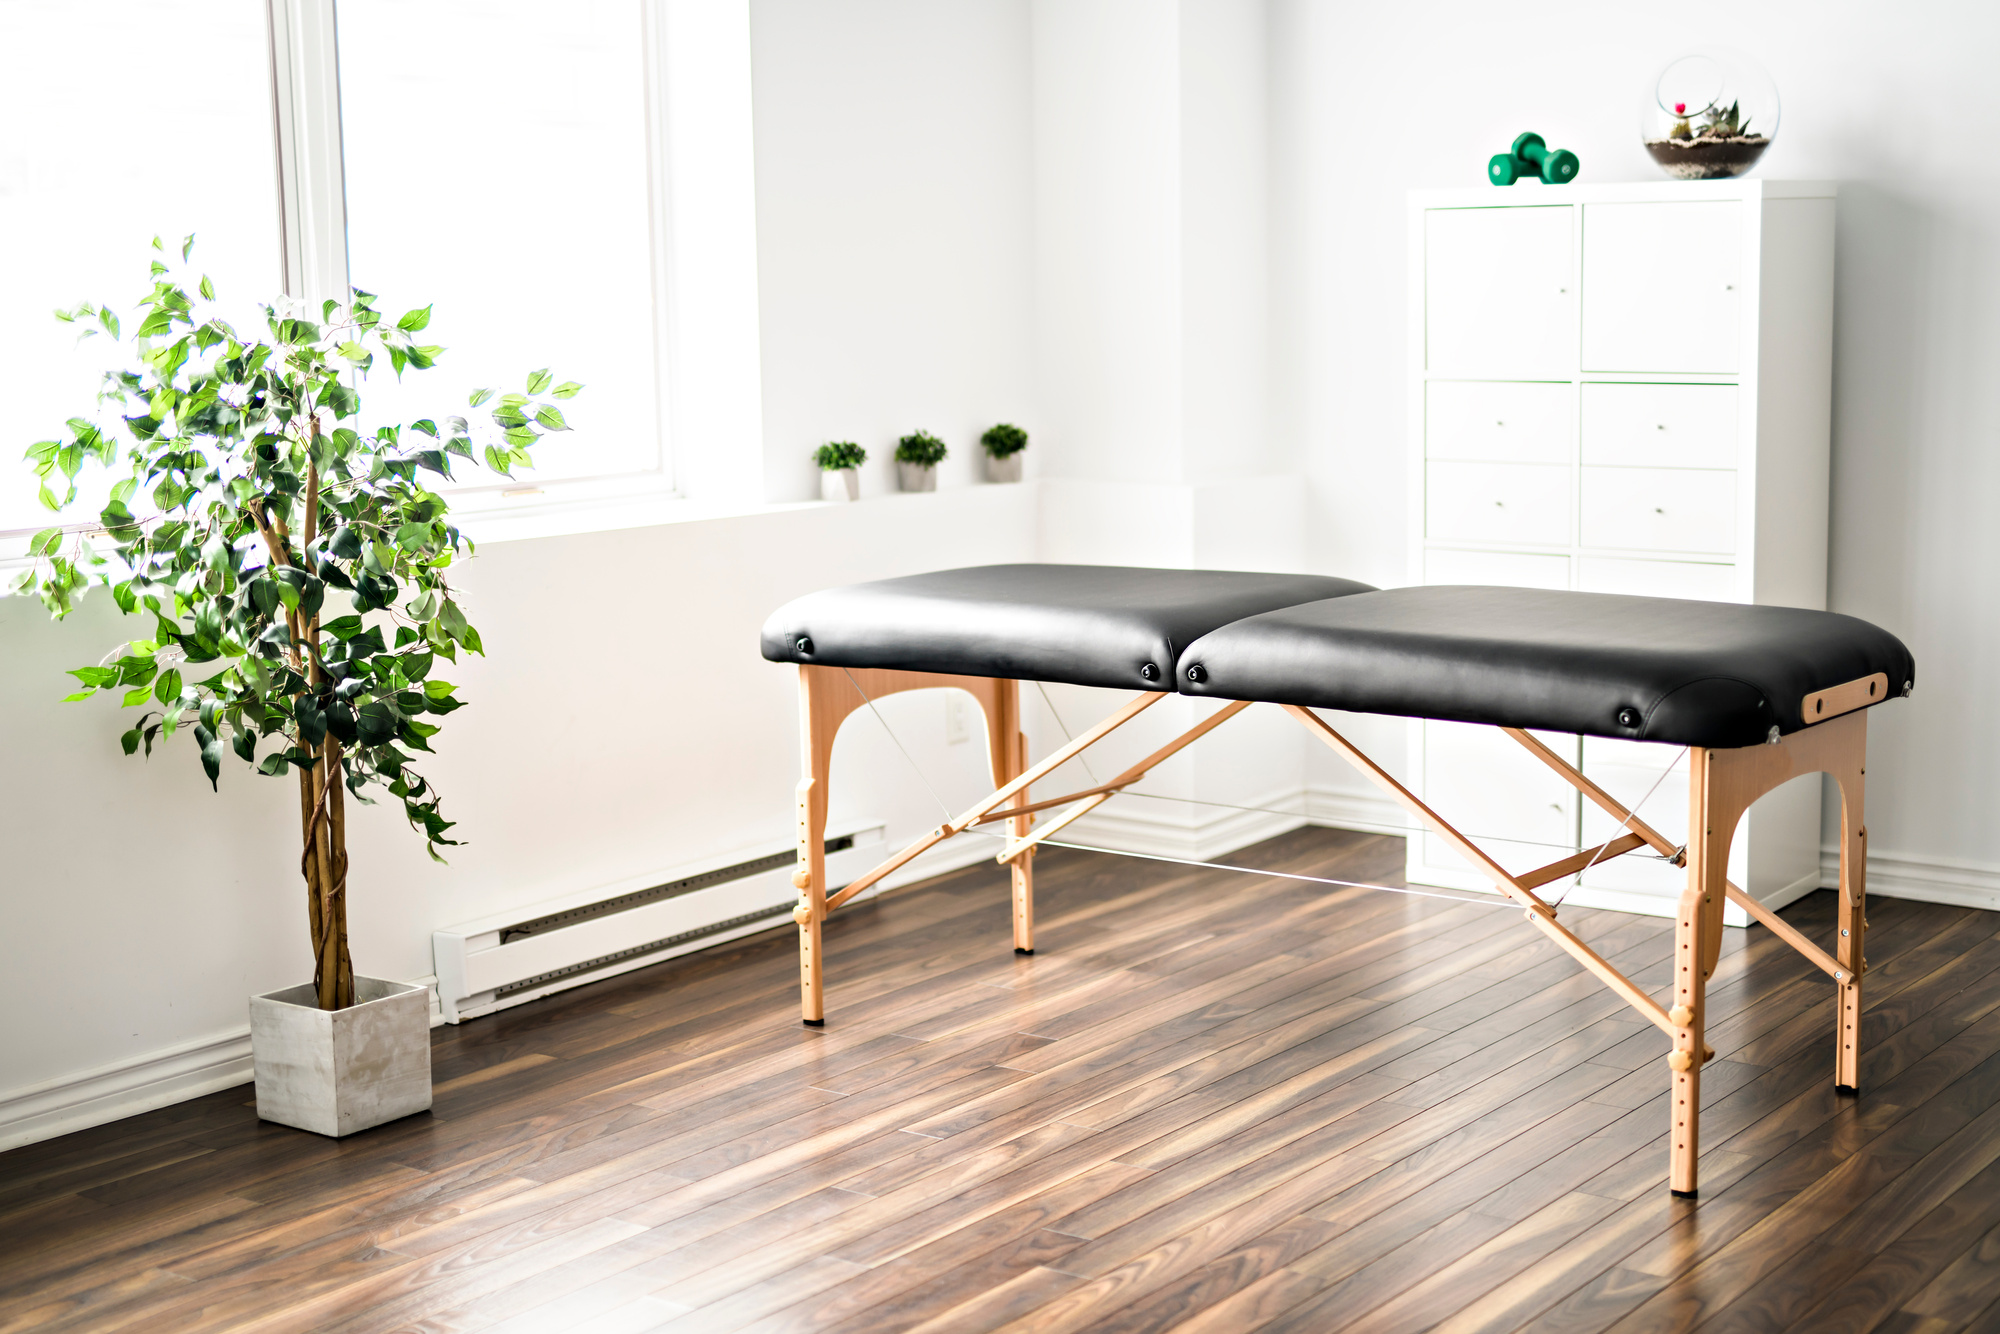 A physiotherapy room with table at work